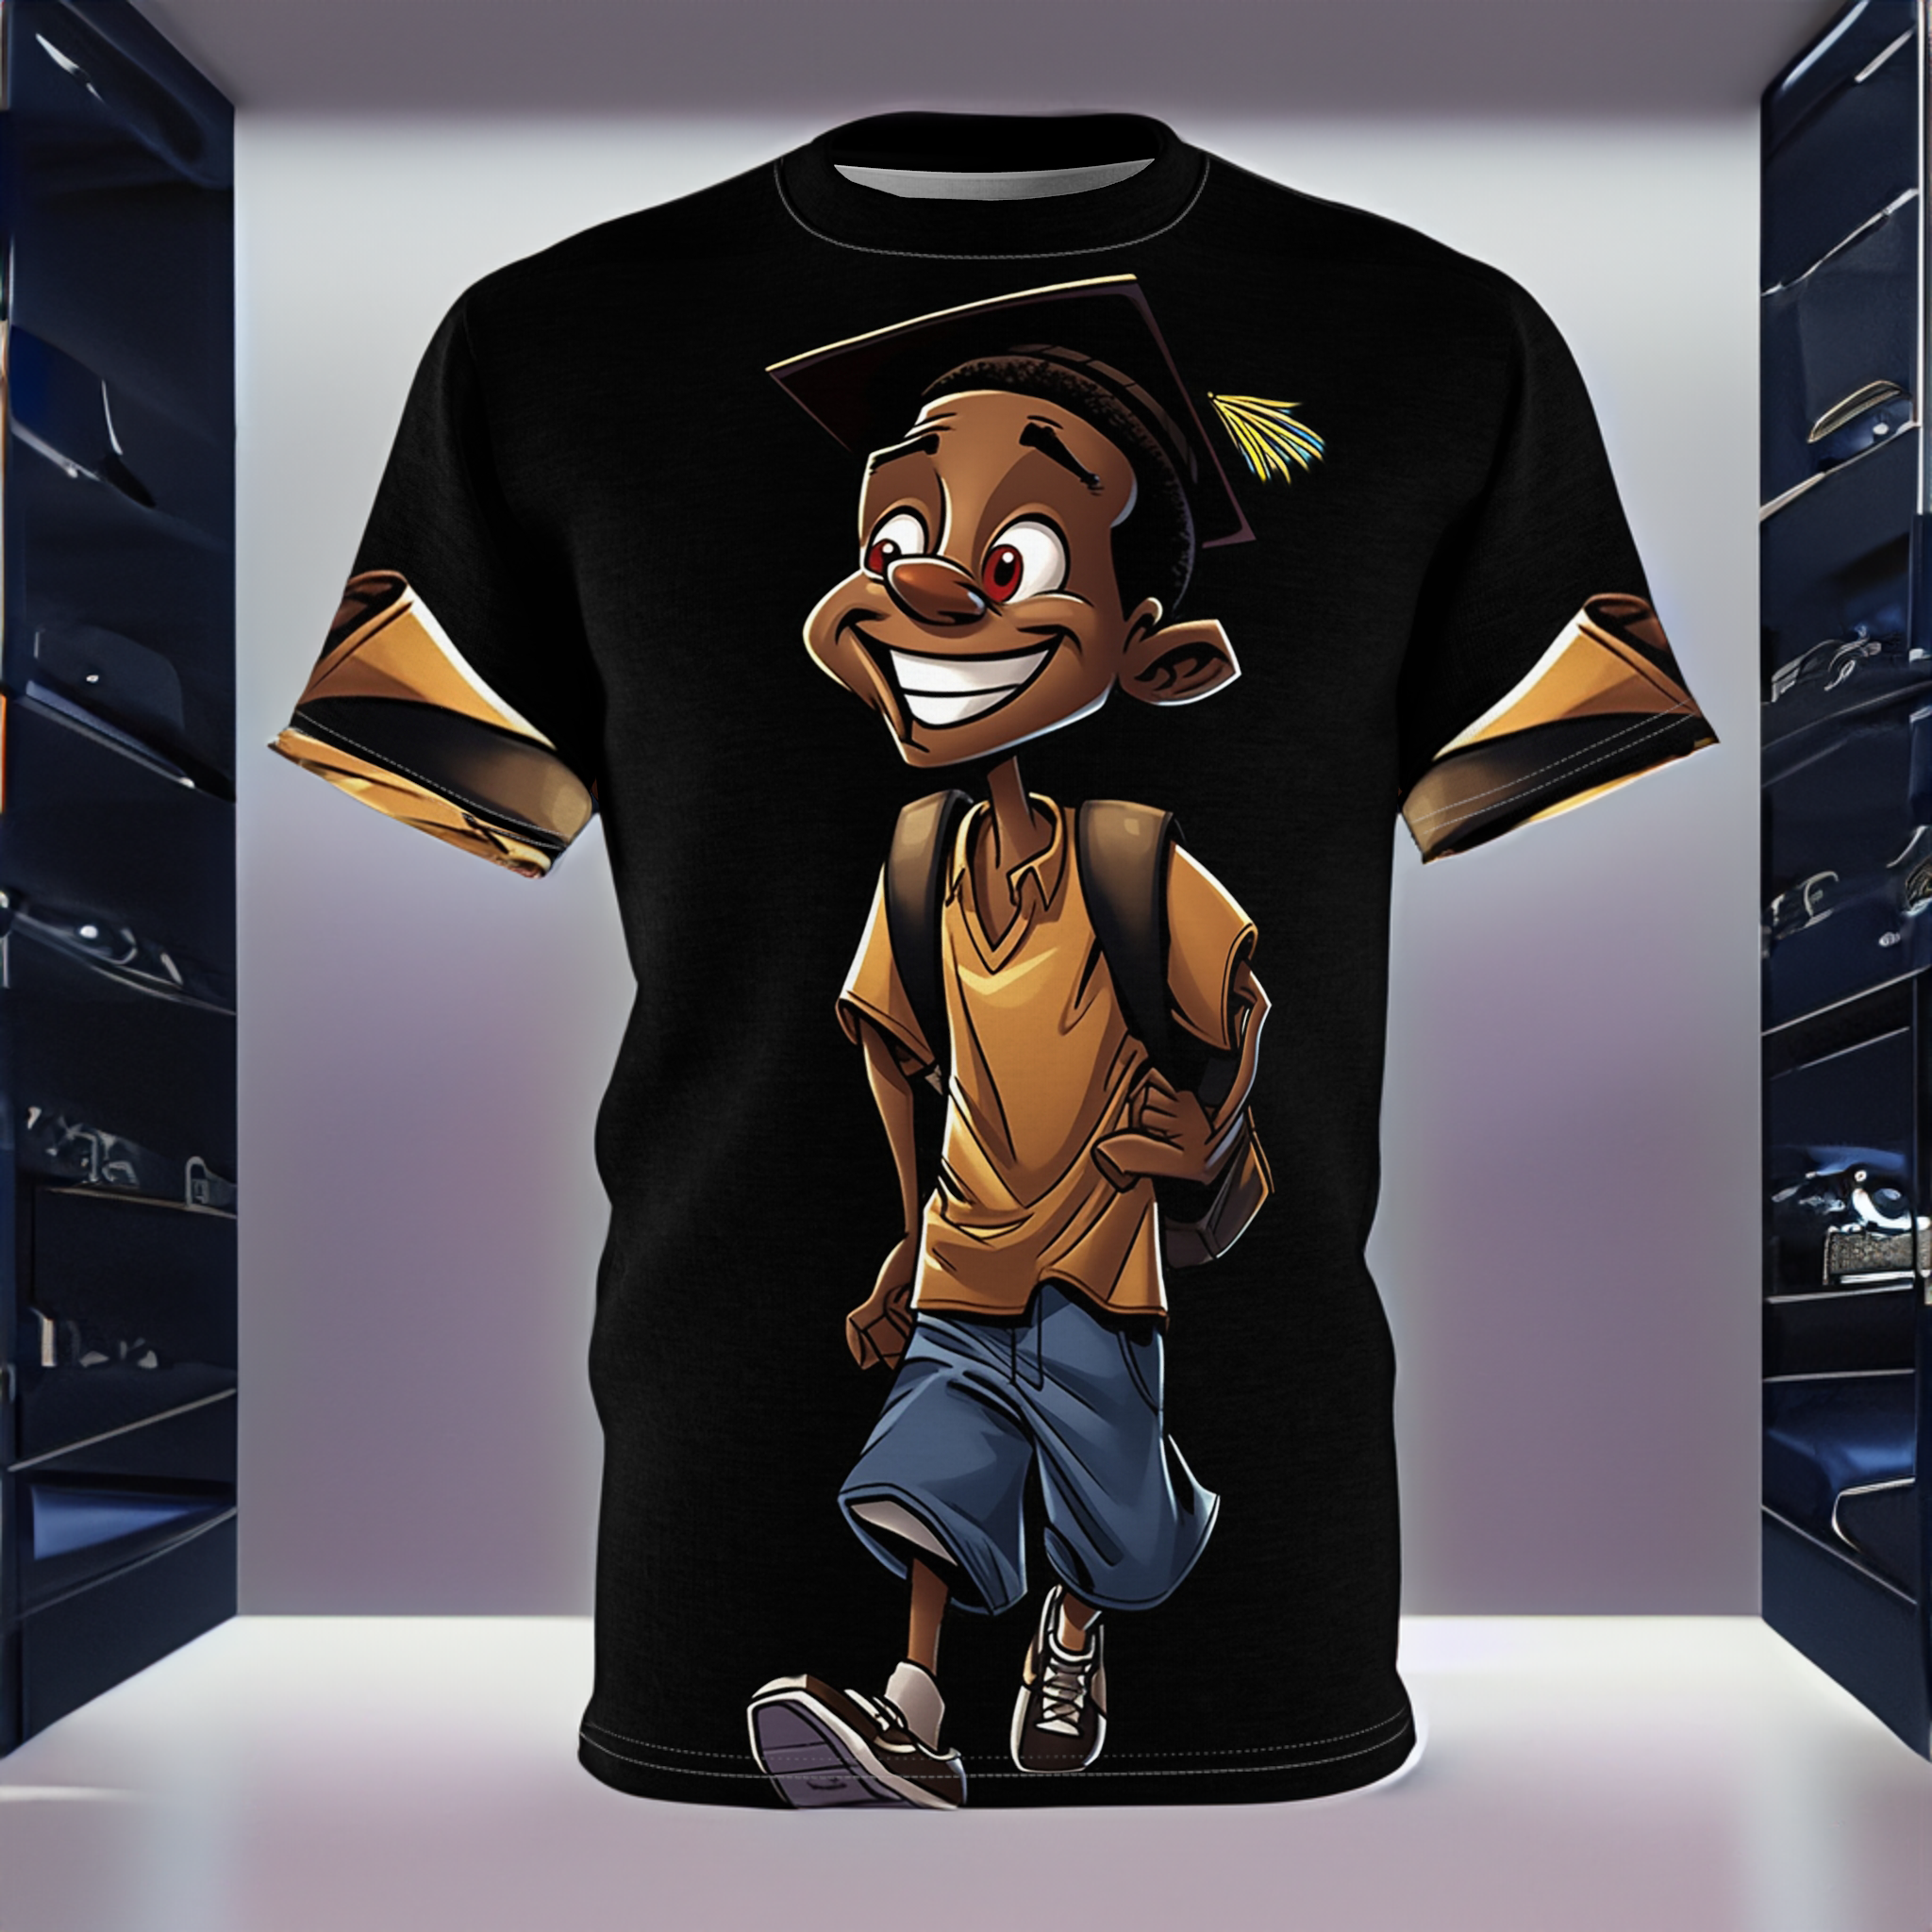 "THE SCHOLAR" - African American Themed Unisex T-shirt